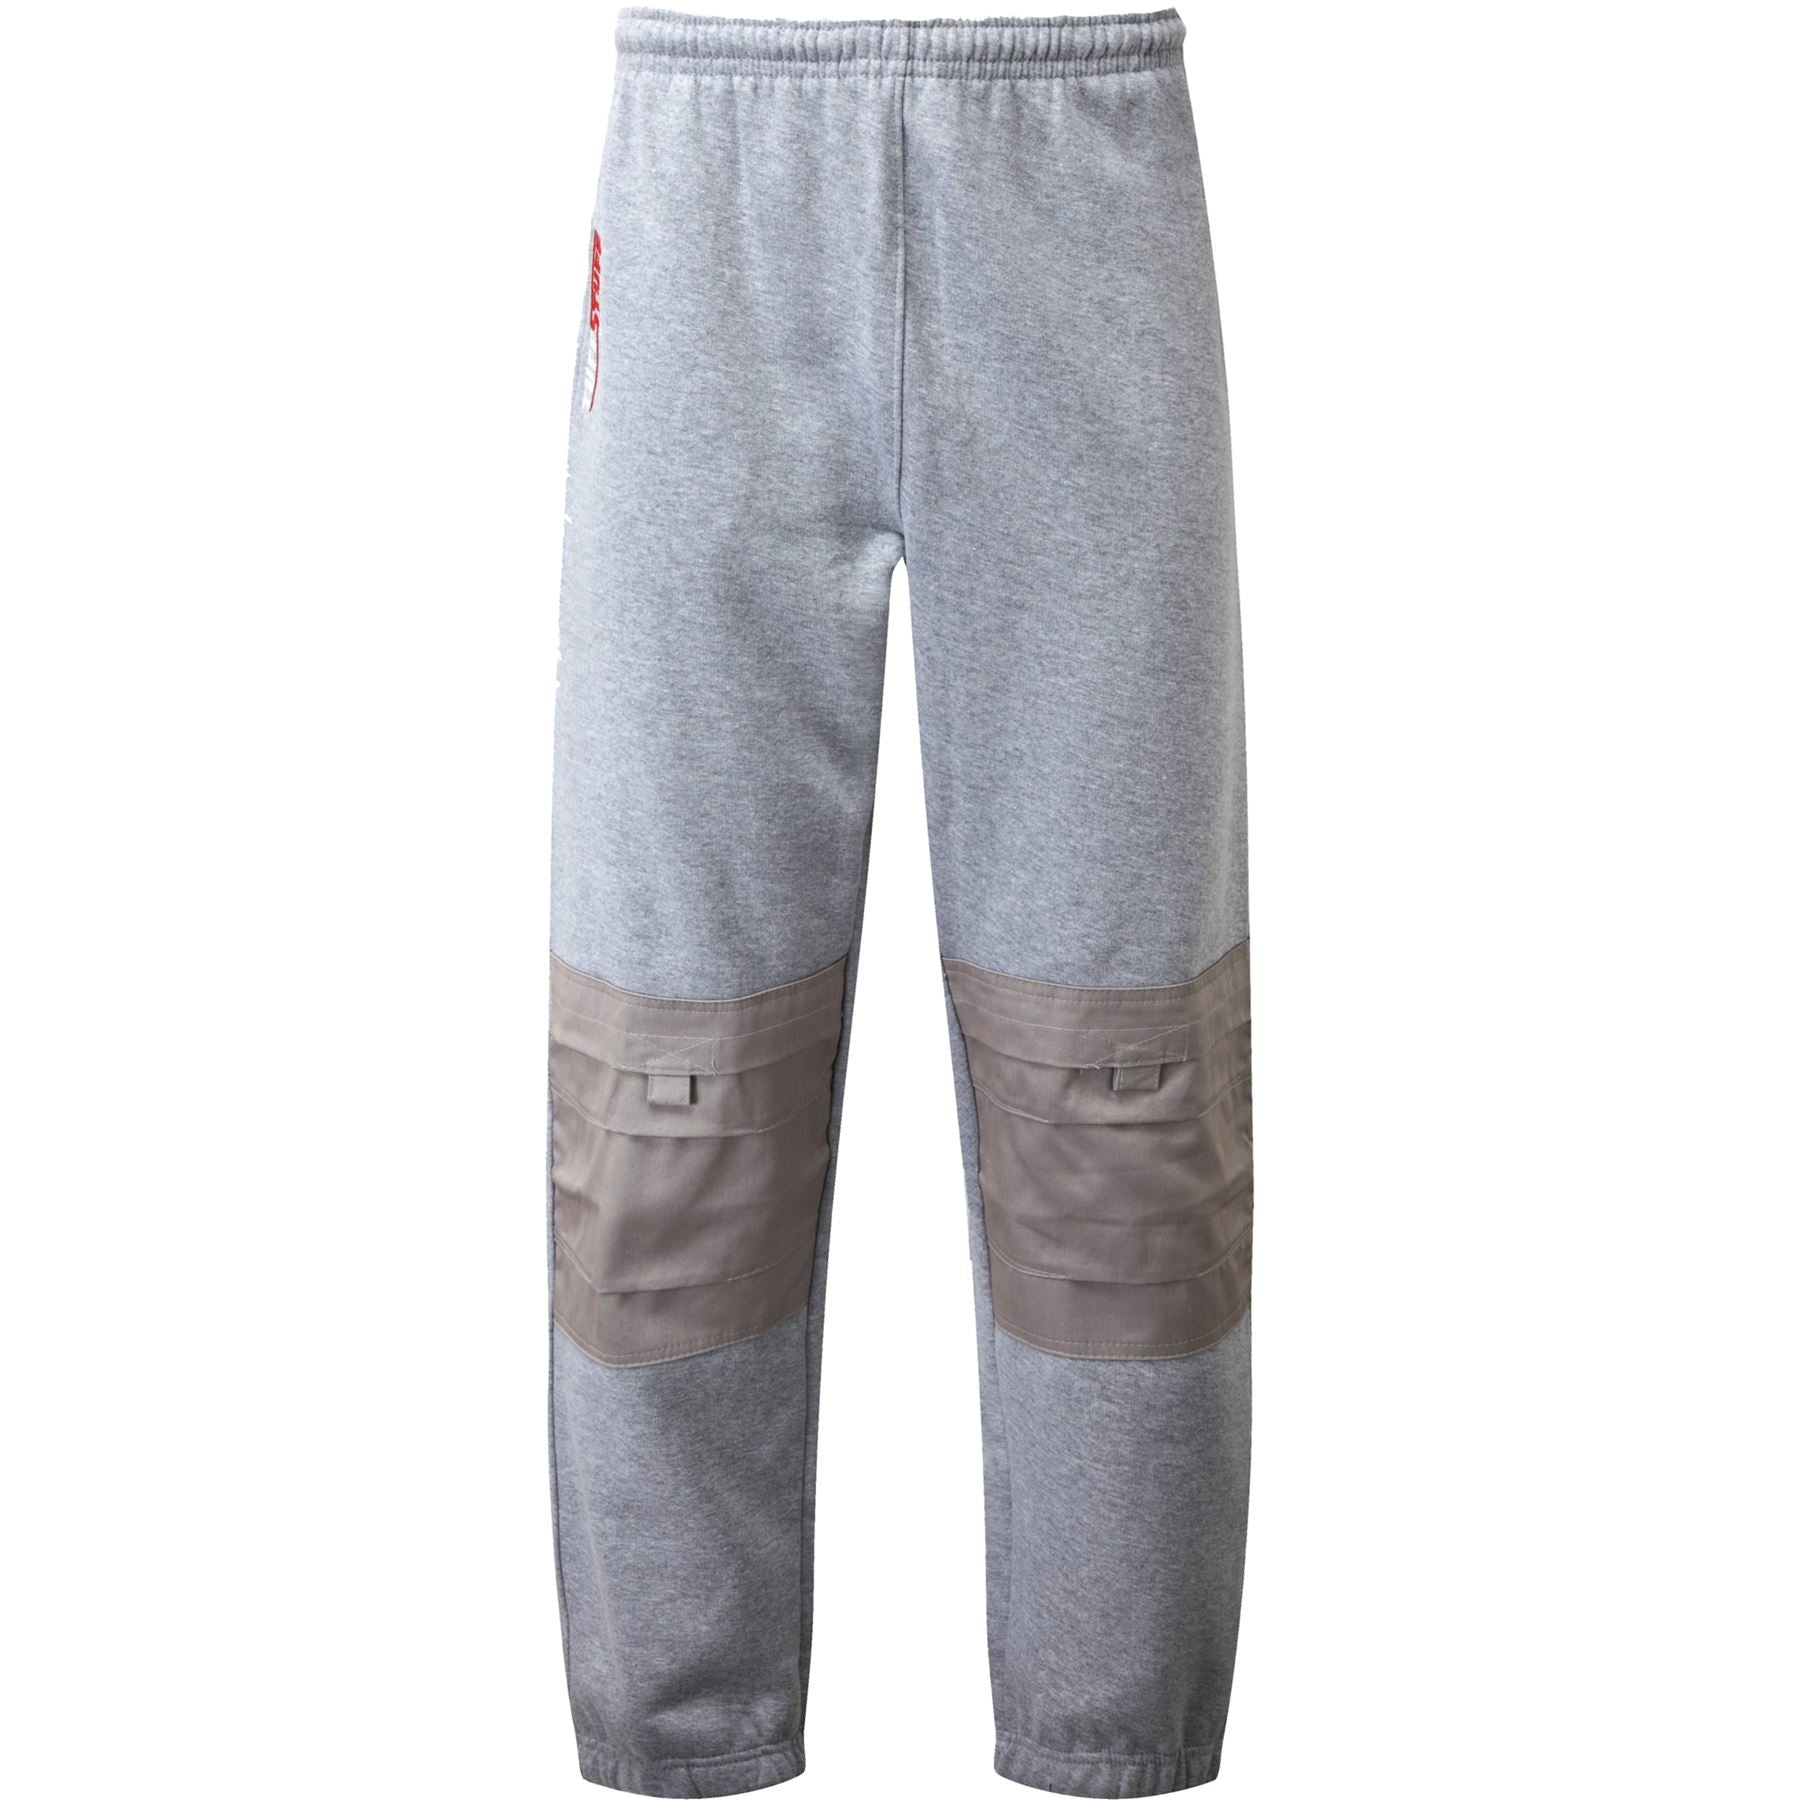 TuffStuff Worker Work Joggers Jogging Bottoms Work Trouser With Knee Pad Pockets